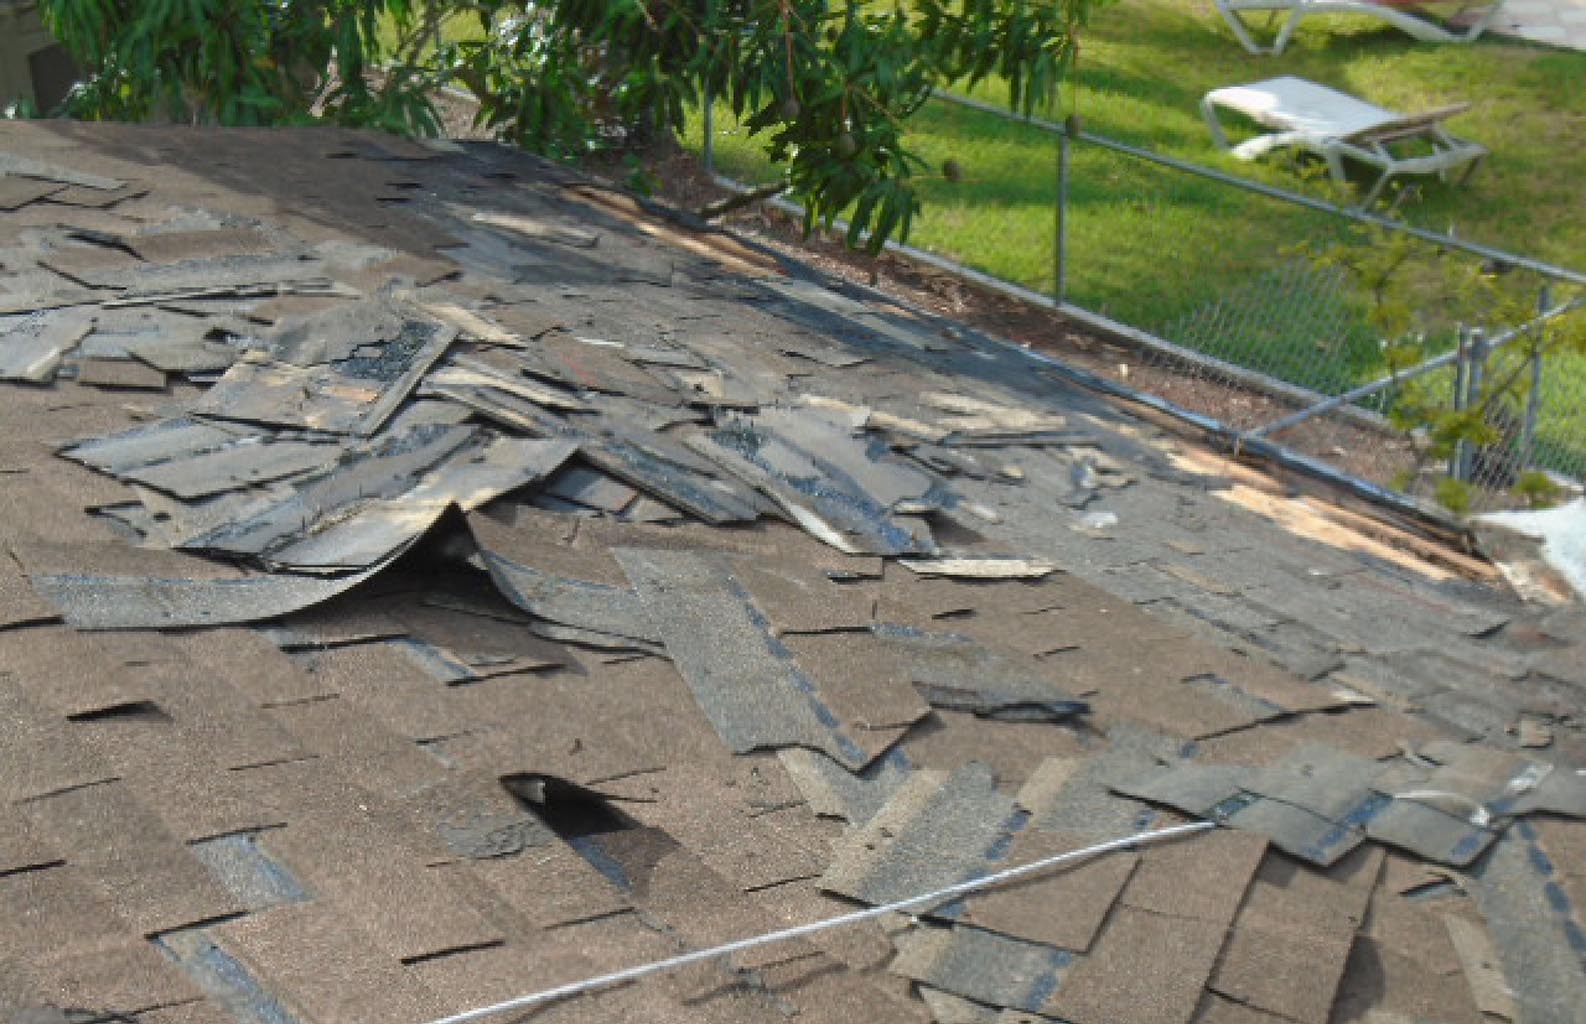 Removal of old shingle roof